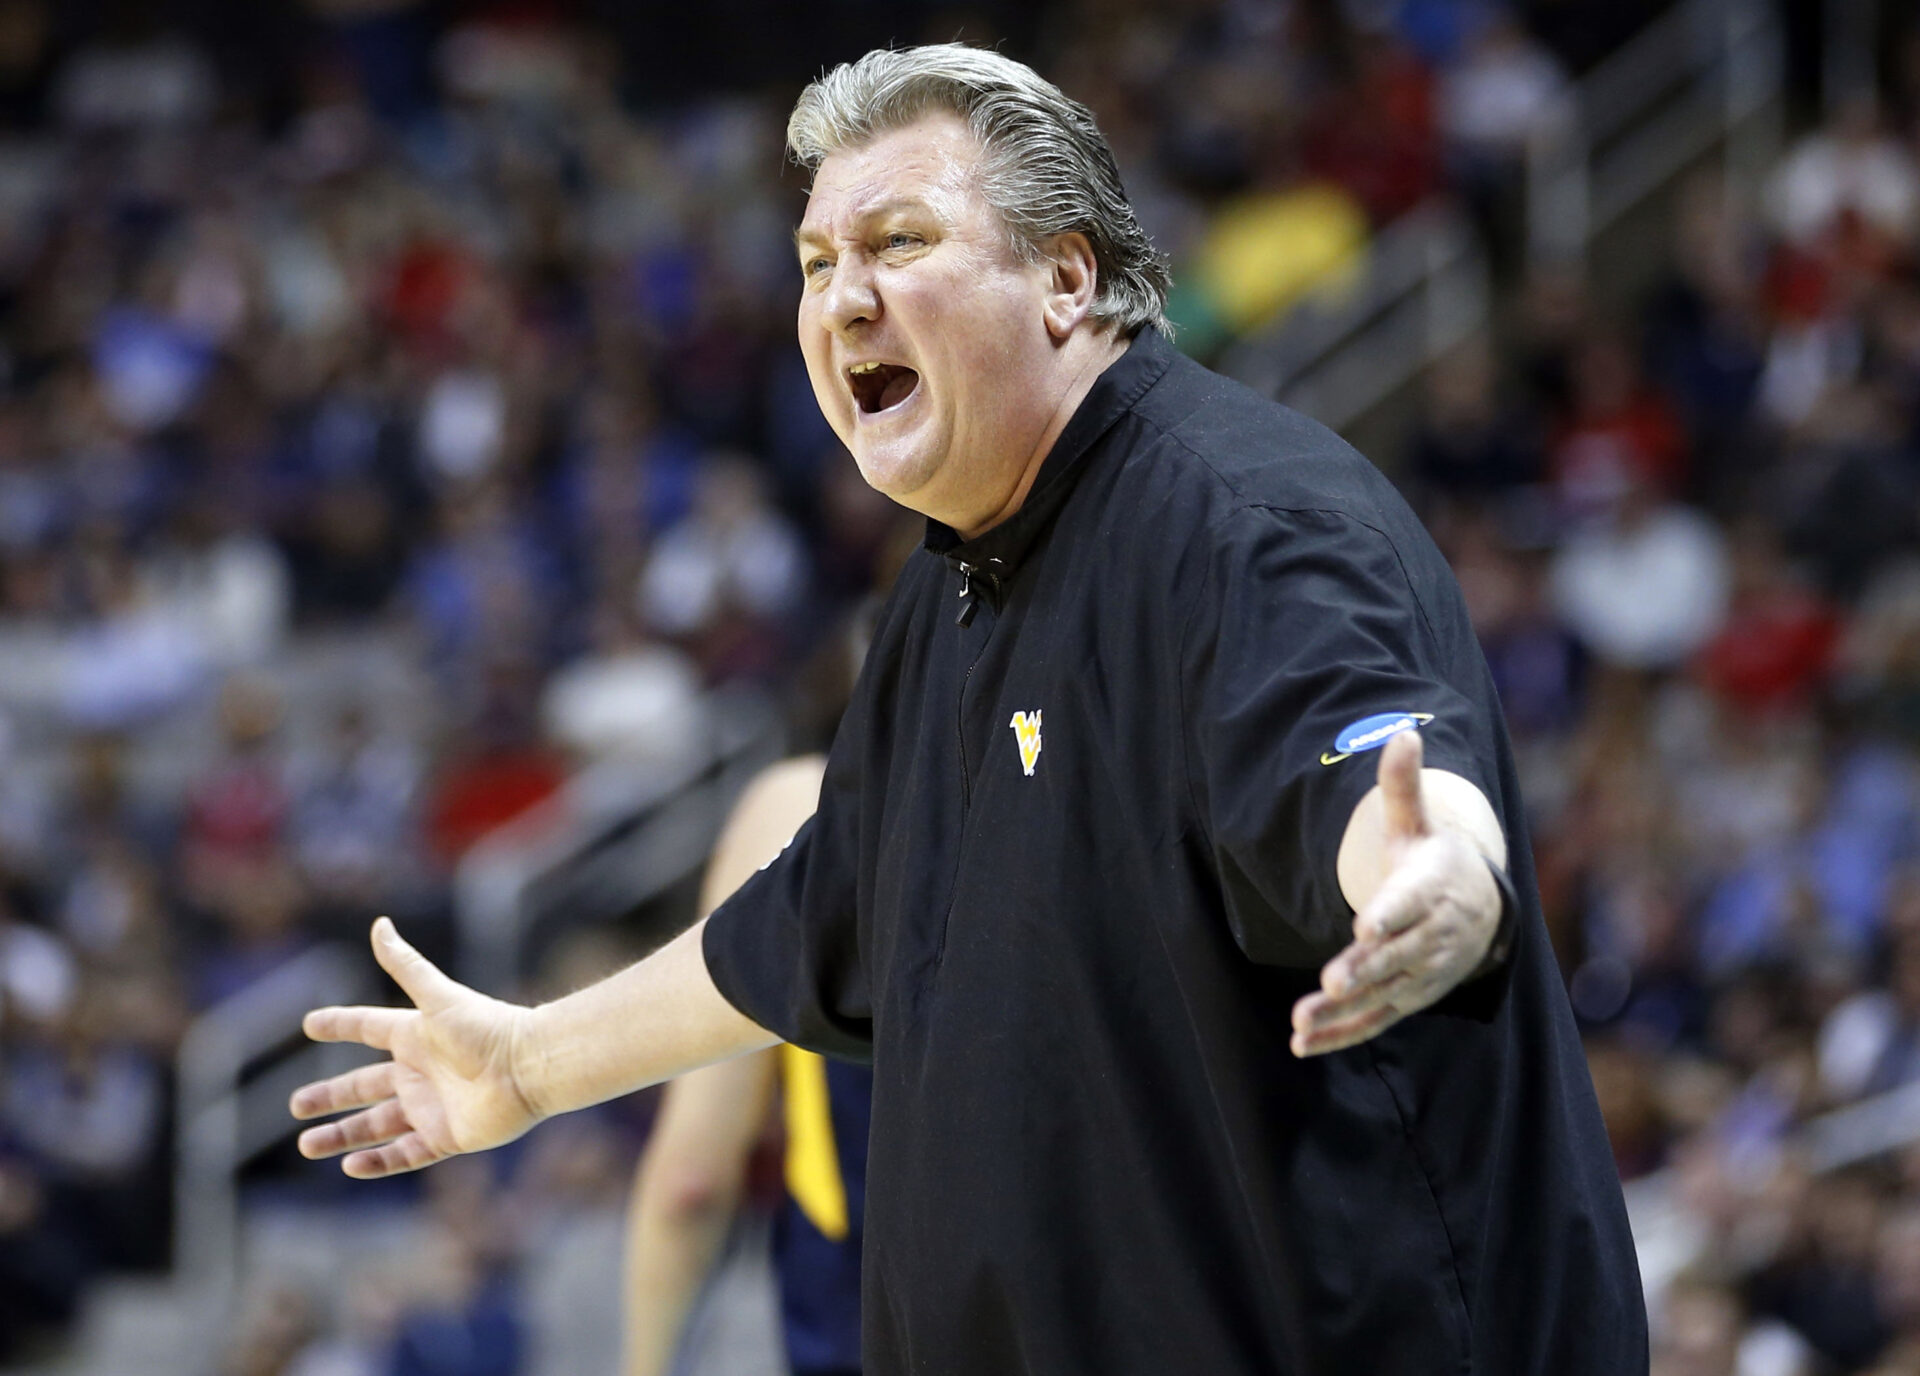 In this March 23, 2017, file photo, West Virginia head coach Bob Huggins yells from the sideline during the first half of an NCAA Tournament college basketball regional semifinal game against Gonzaga in San Jose, Calif.